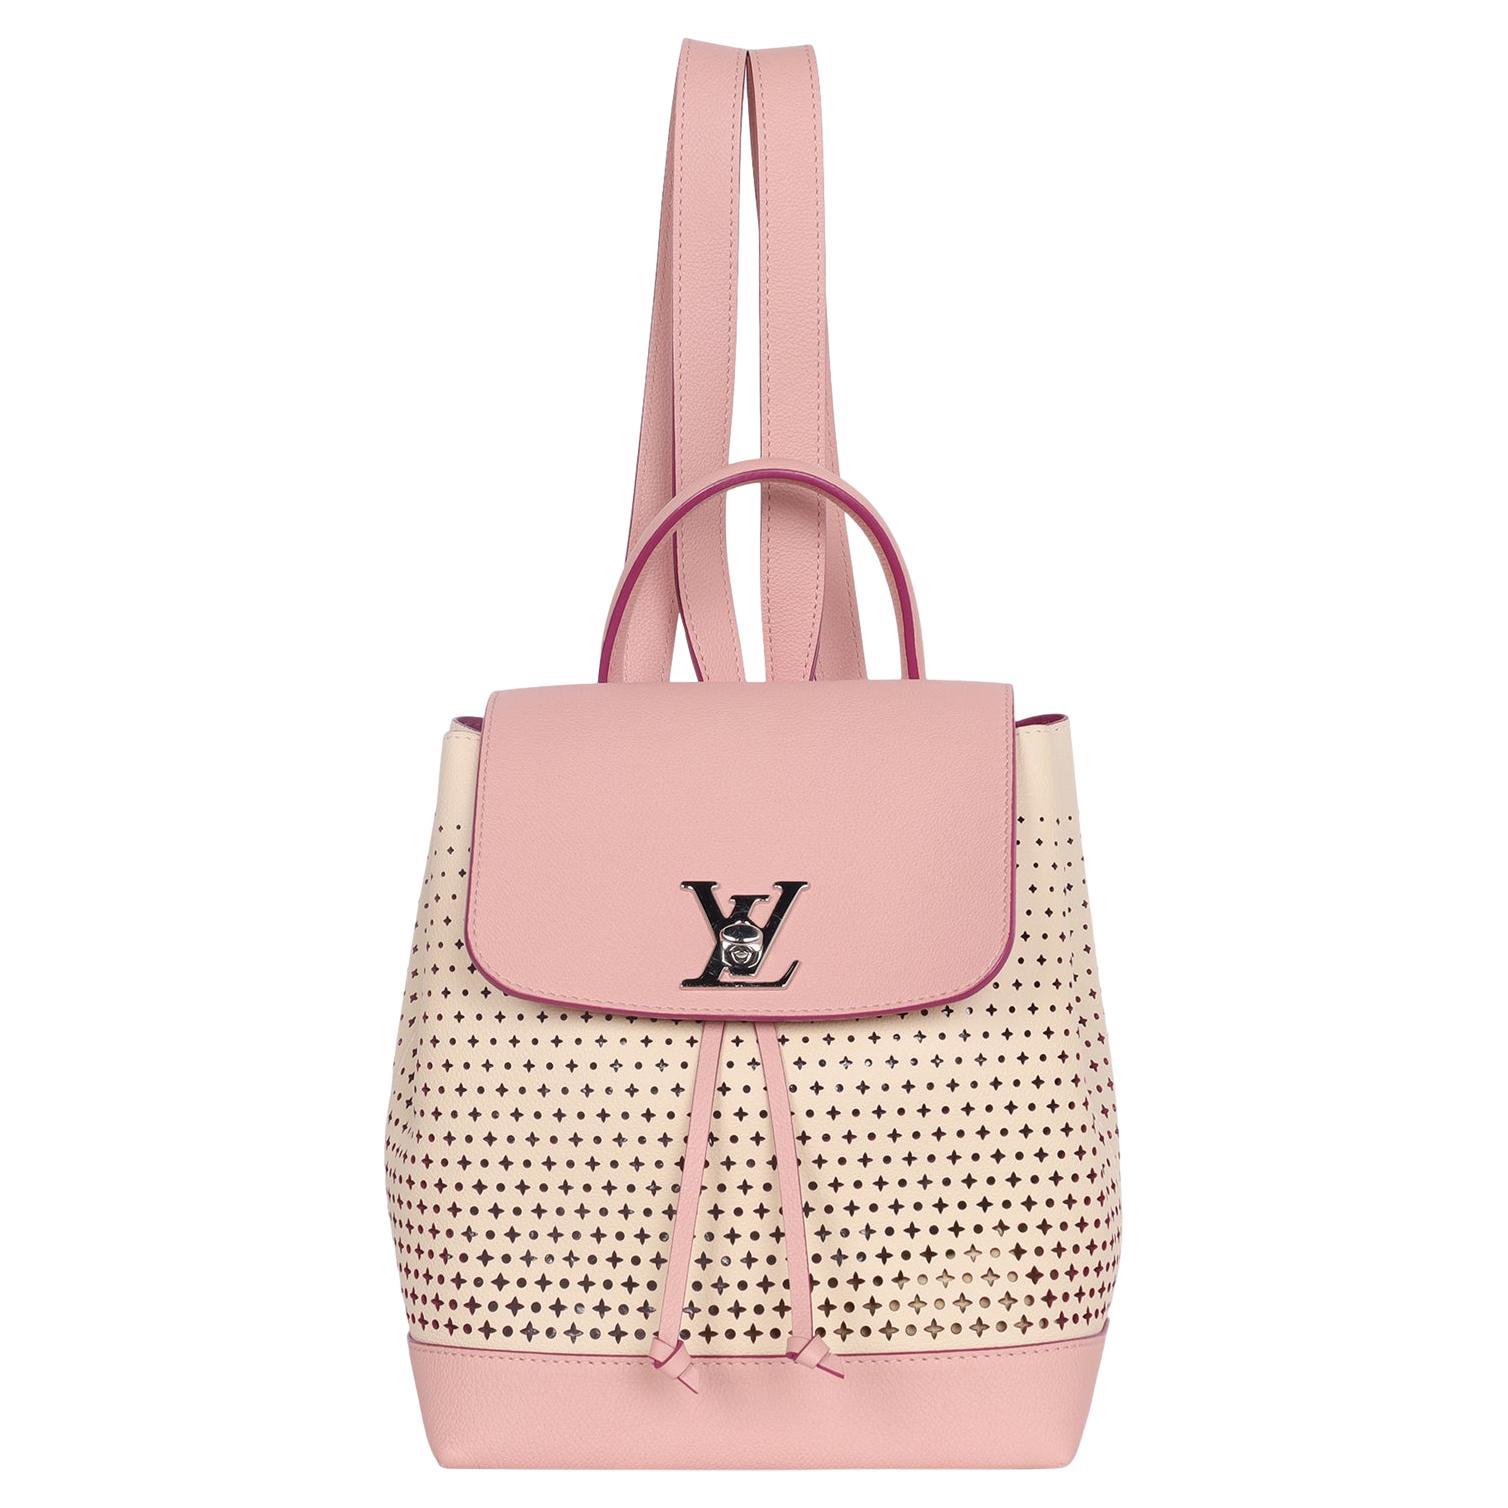 Authentic Louis Vuitton Pink Perforated Leather Lockme Backpack. Features a pink and off white perforated leather body, an adjustable top drawstring and turn lock closure, an interior slip pocket, silver hardware, adjustable shoulder straps. Super